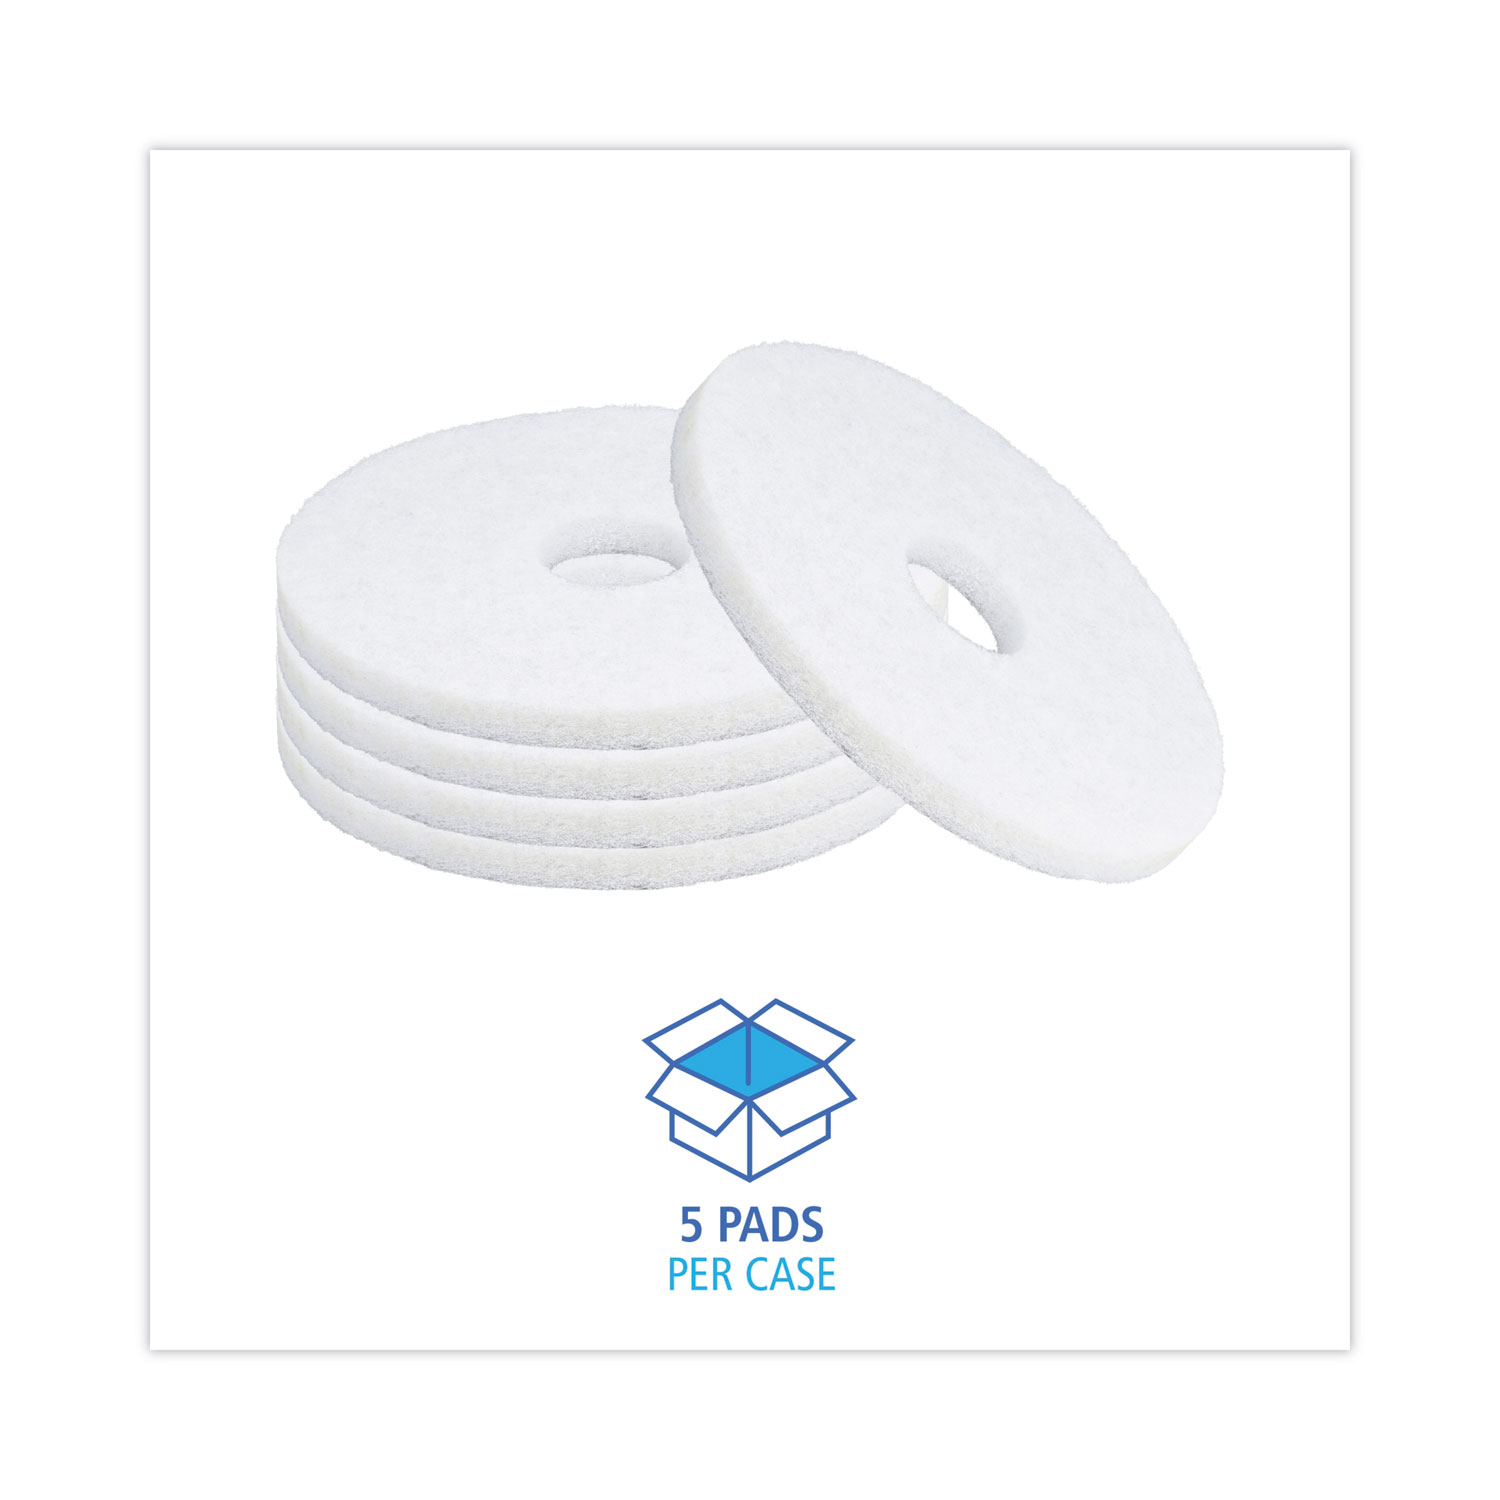 14" WHITE POLISHING FLOOR PADS 5 PADS IN BOX PROLINK 